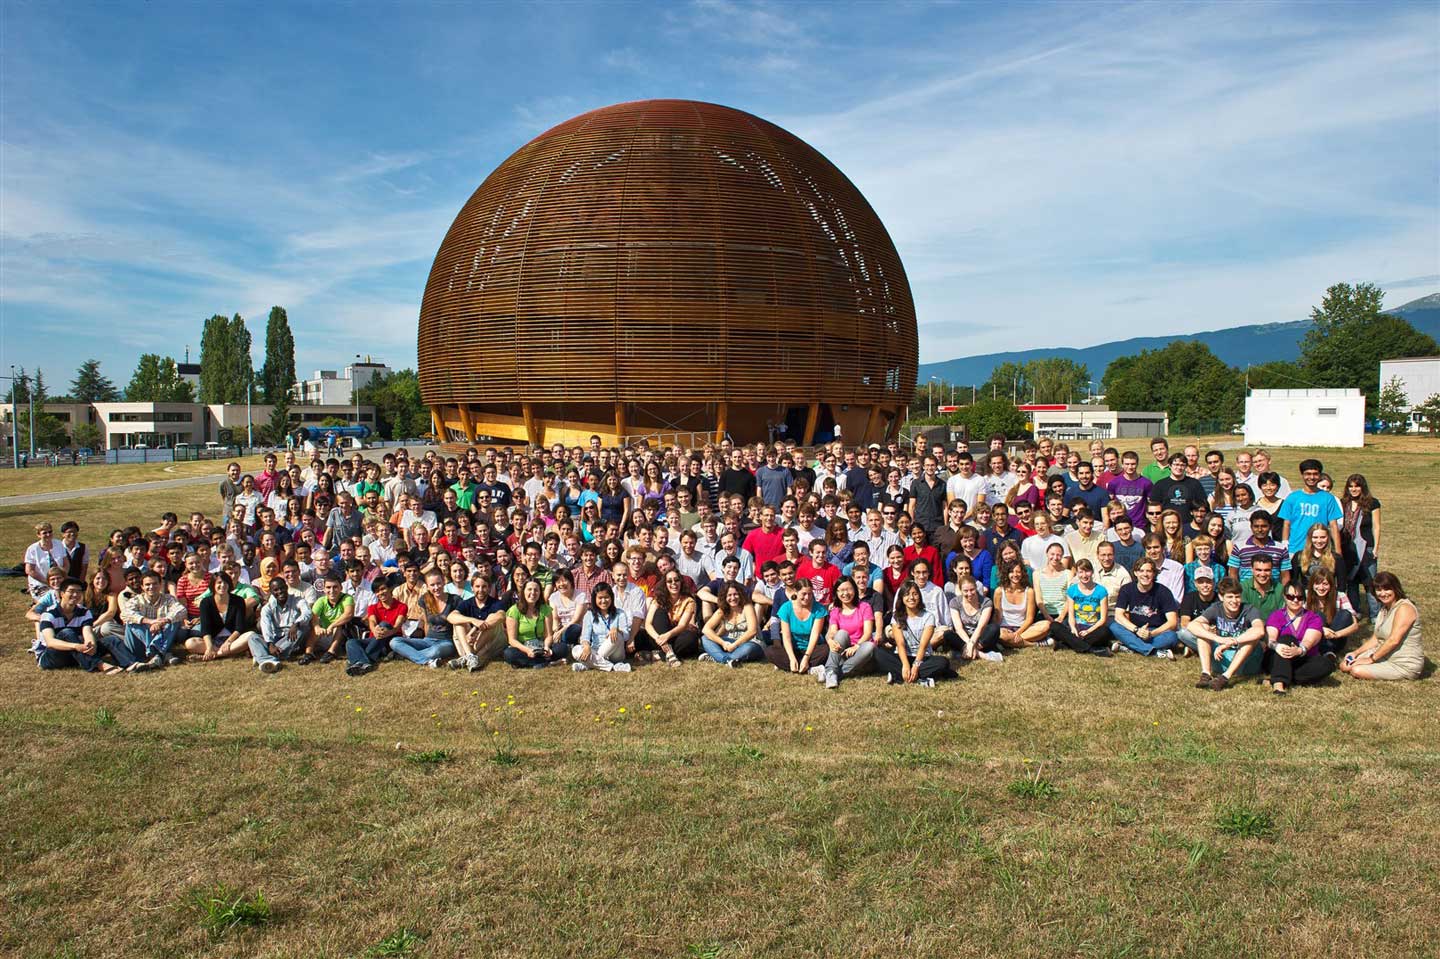 Students! Apply now for CERN's Summer Student Programme CERN